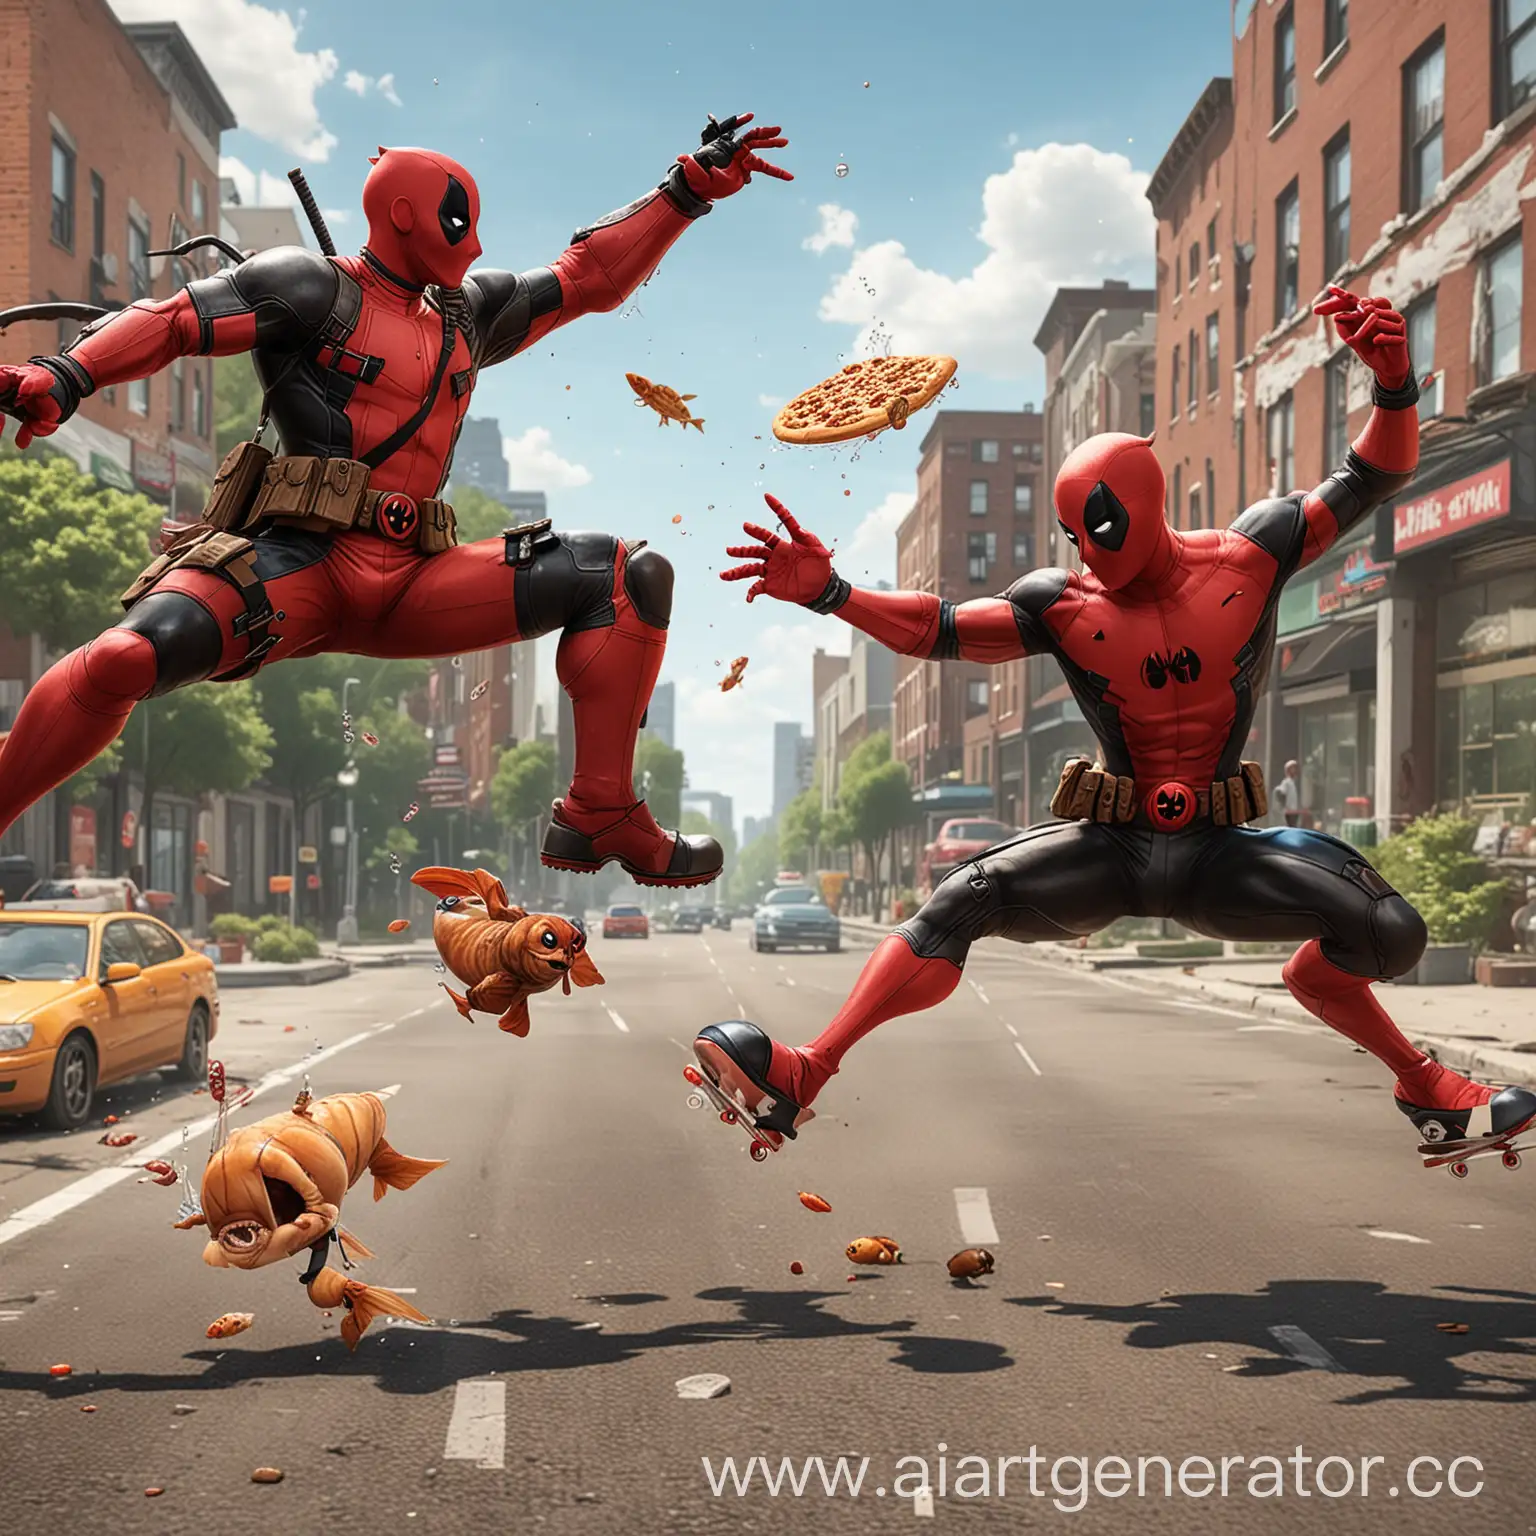 Cartoon-Deadpool-and-SpiderMan-Roller-Skating-While-Fighting-with-Fish-and-Flying-Pizzas